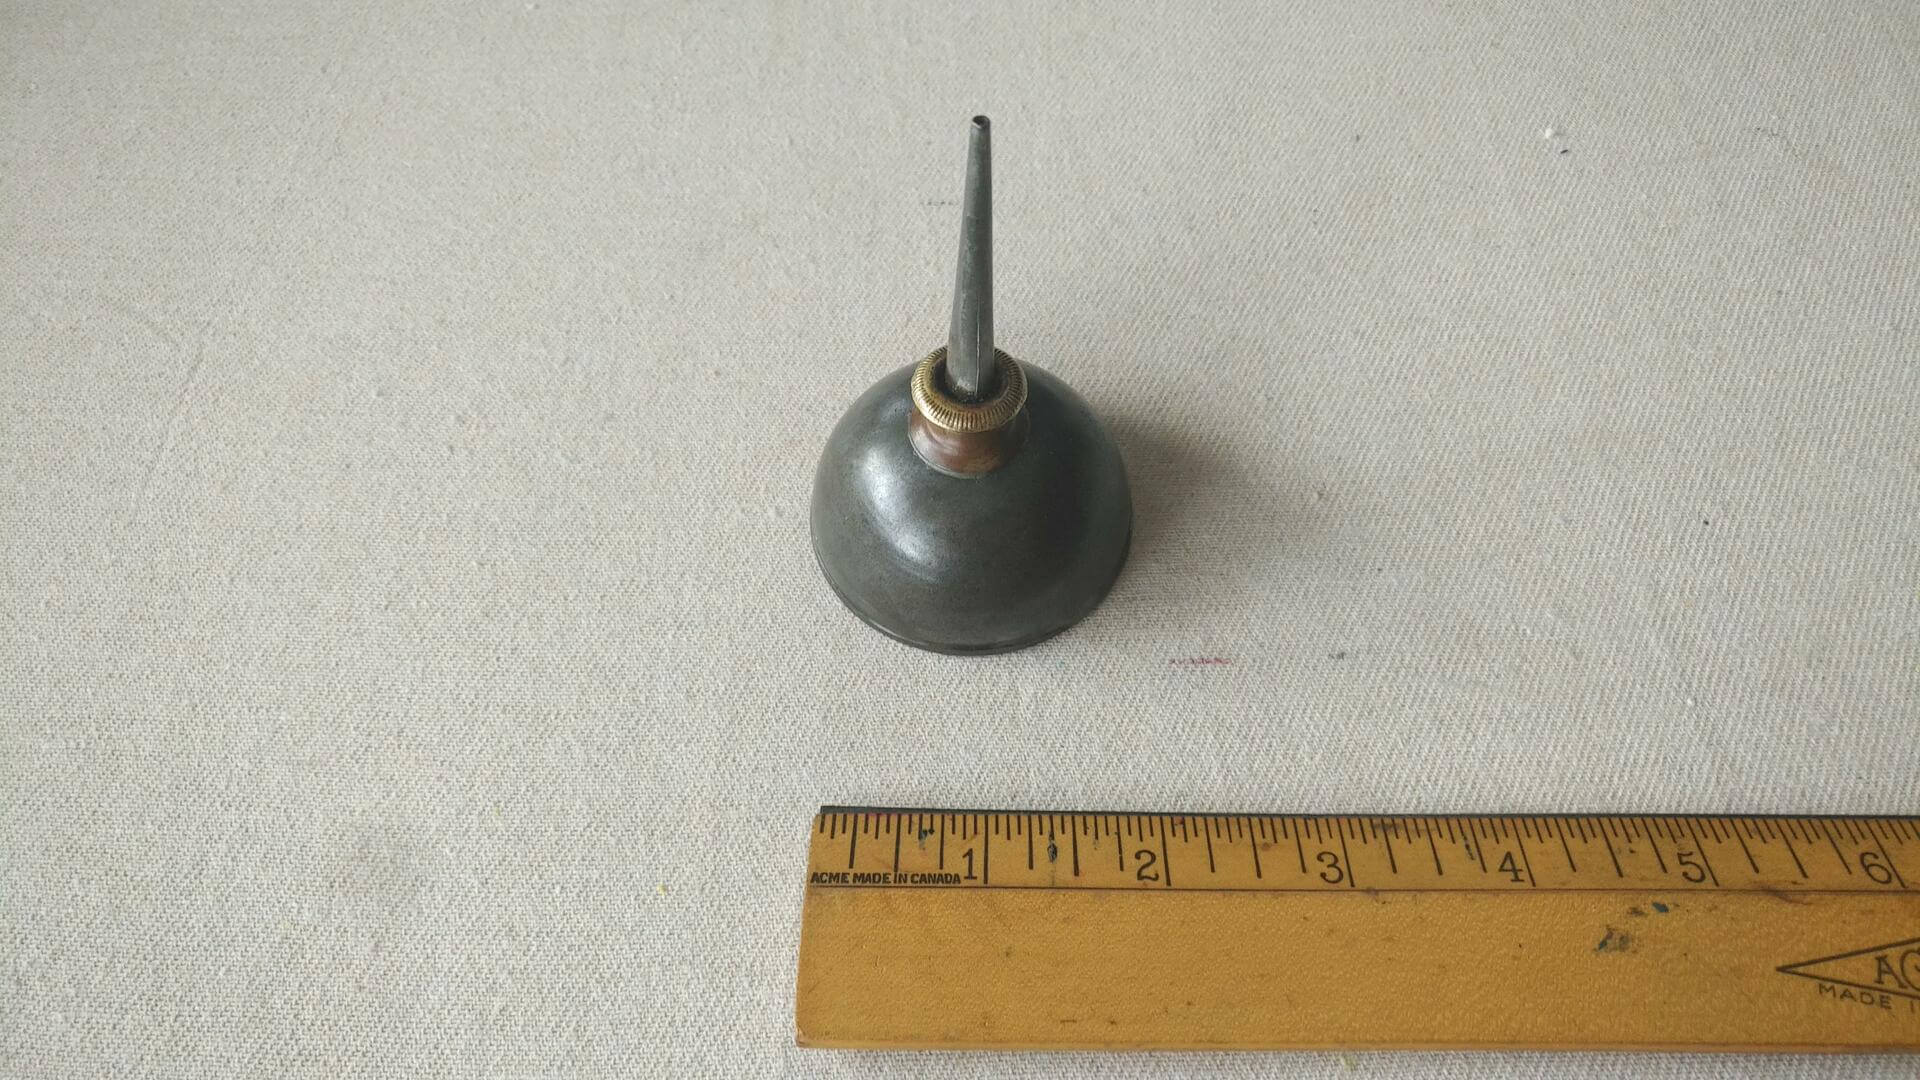 Antique thumb pump oiler, metal oil can copper thread & brass cap detail on spout. Vintage made in USA collectible oil dropper automotive & sewing tools